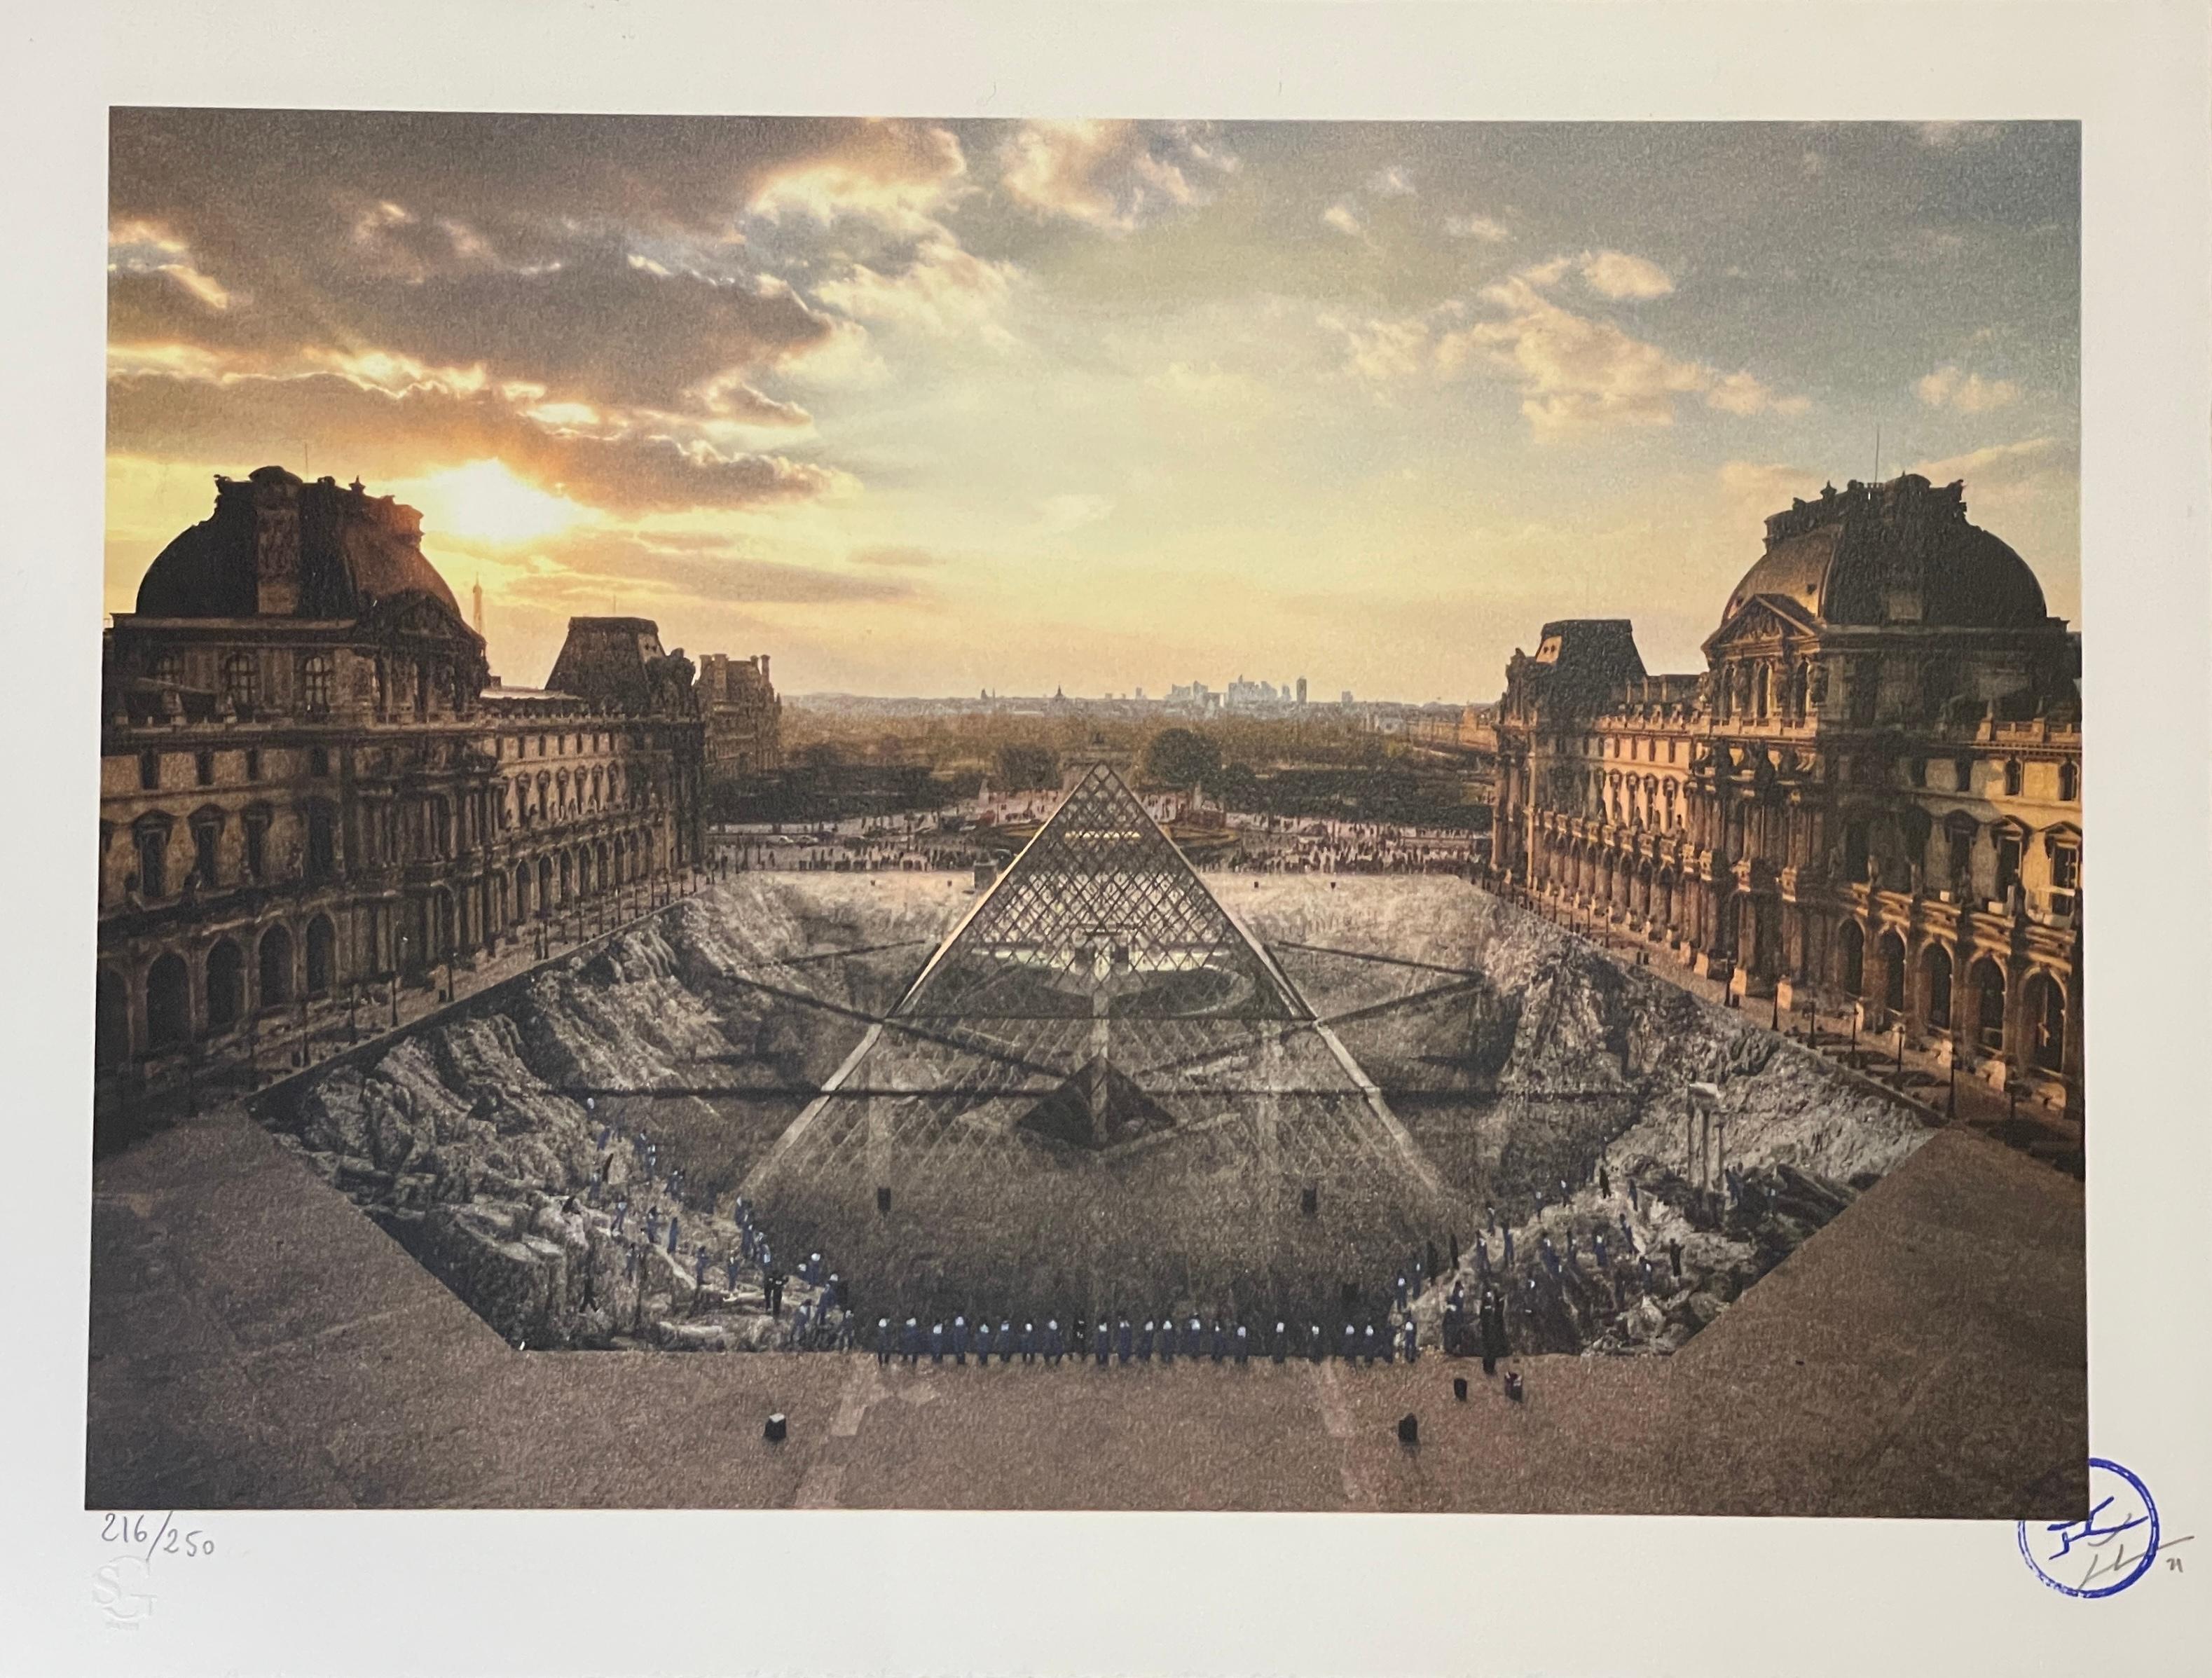 JR, JR au Louvre, 29 Mars 2019, 18h08
Contemporary, 21st Century, Print, Edition
20 colors lithograph on white paper BFK Rives - 300 grams
Edition of 250
35 x 46 cm (13.8 x 18.1 in)
Signed on the bottom right corner (stamp and lead), numbered on the